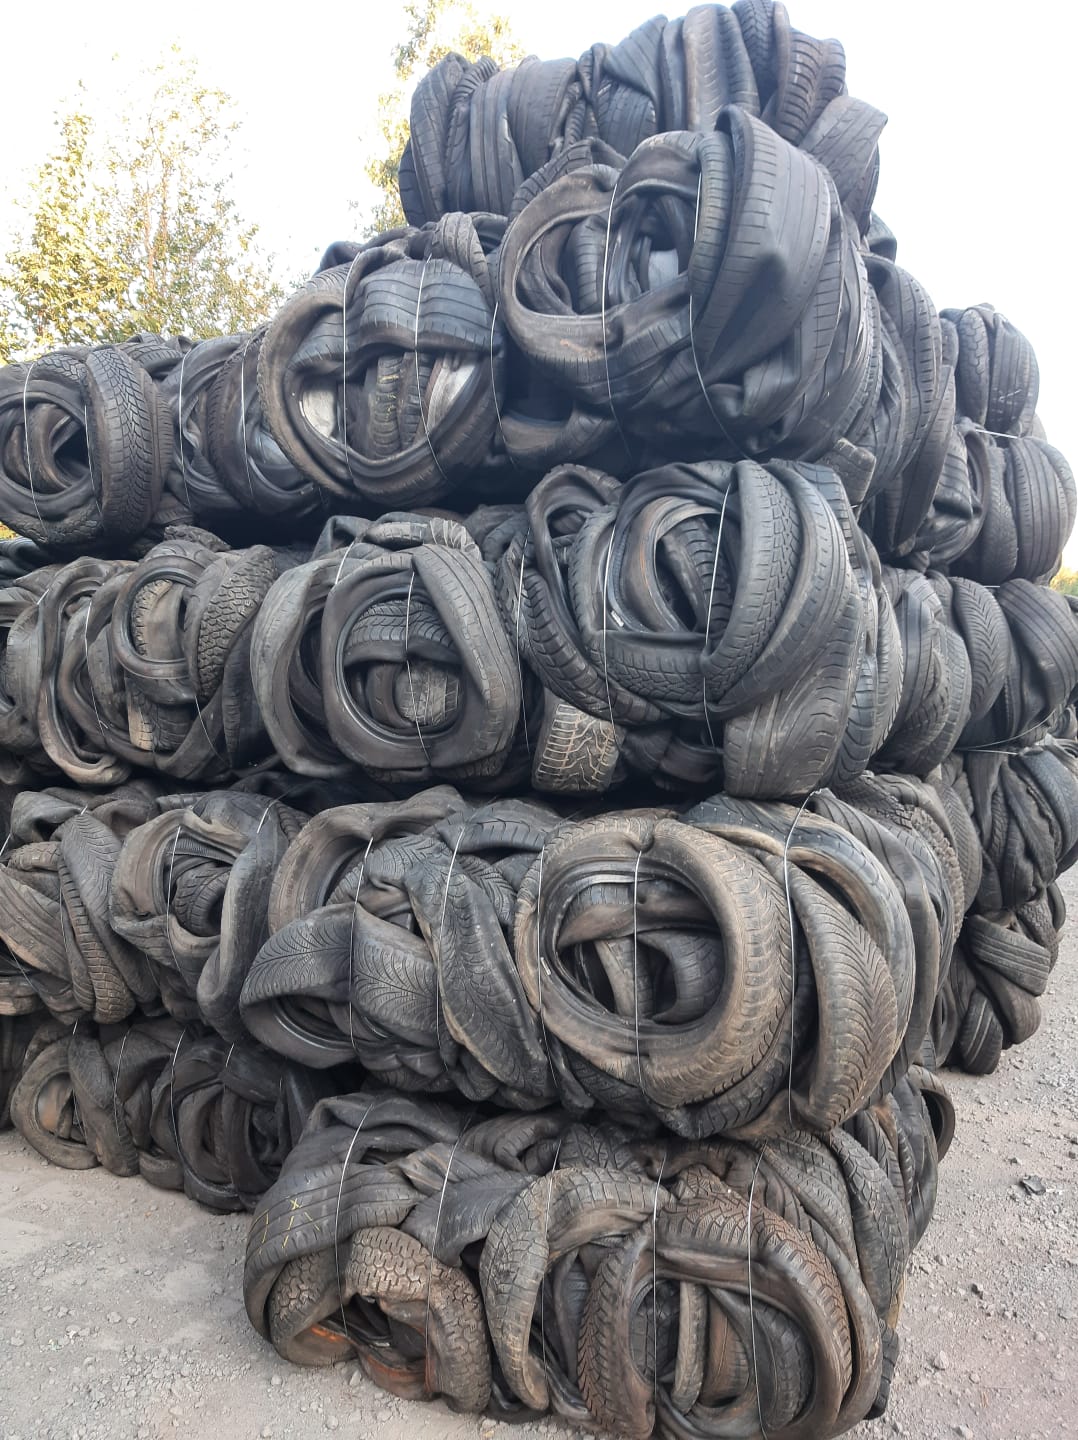 Used Tyre / Tire Scrap Waste Disposal In Iceland